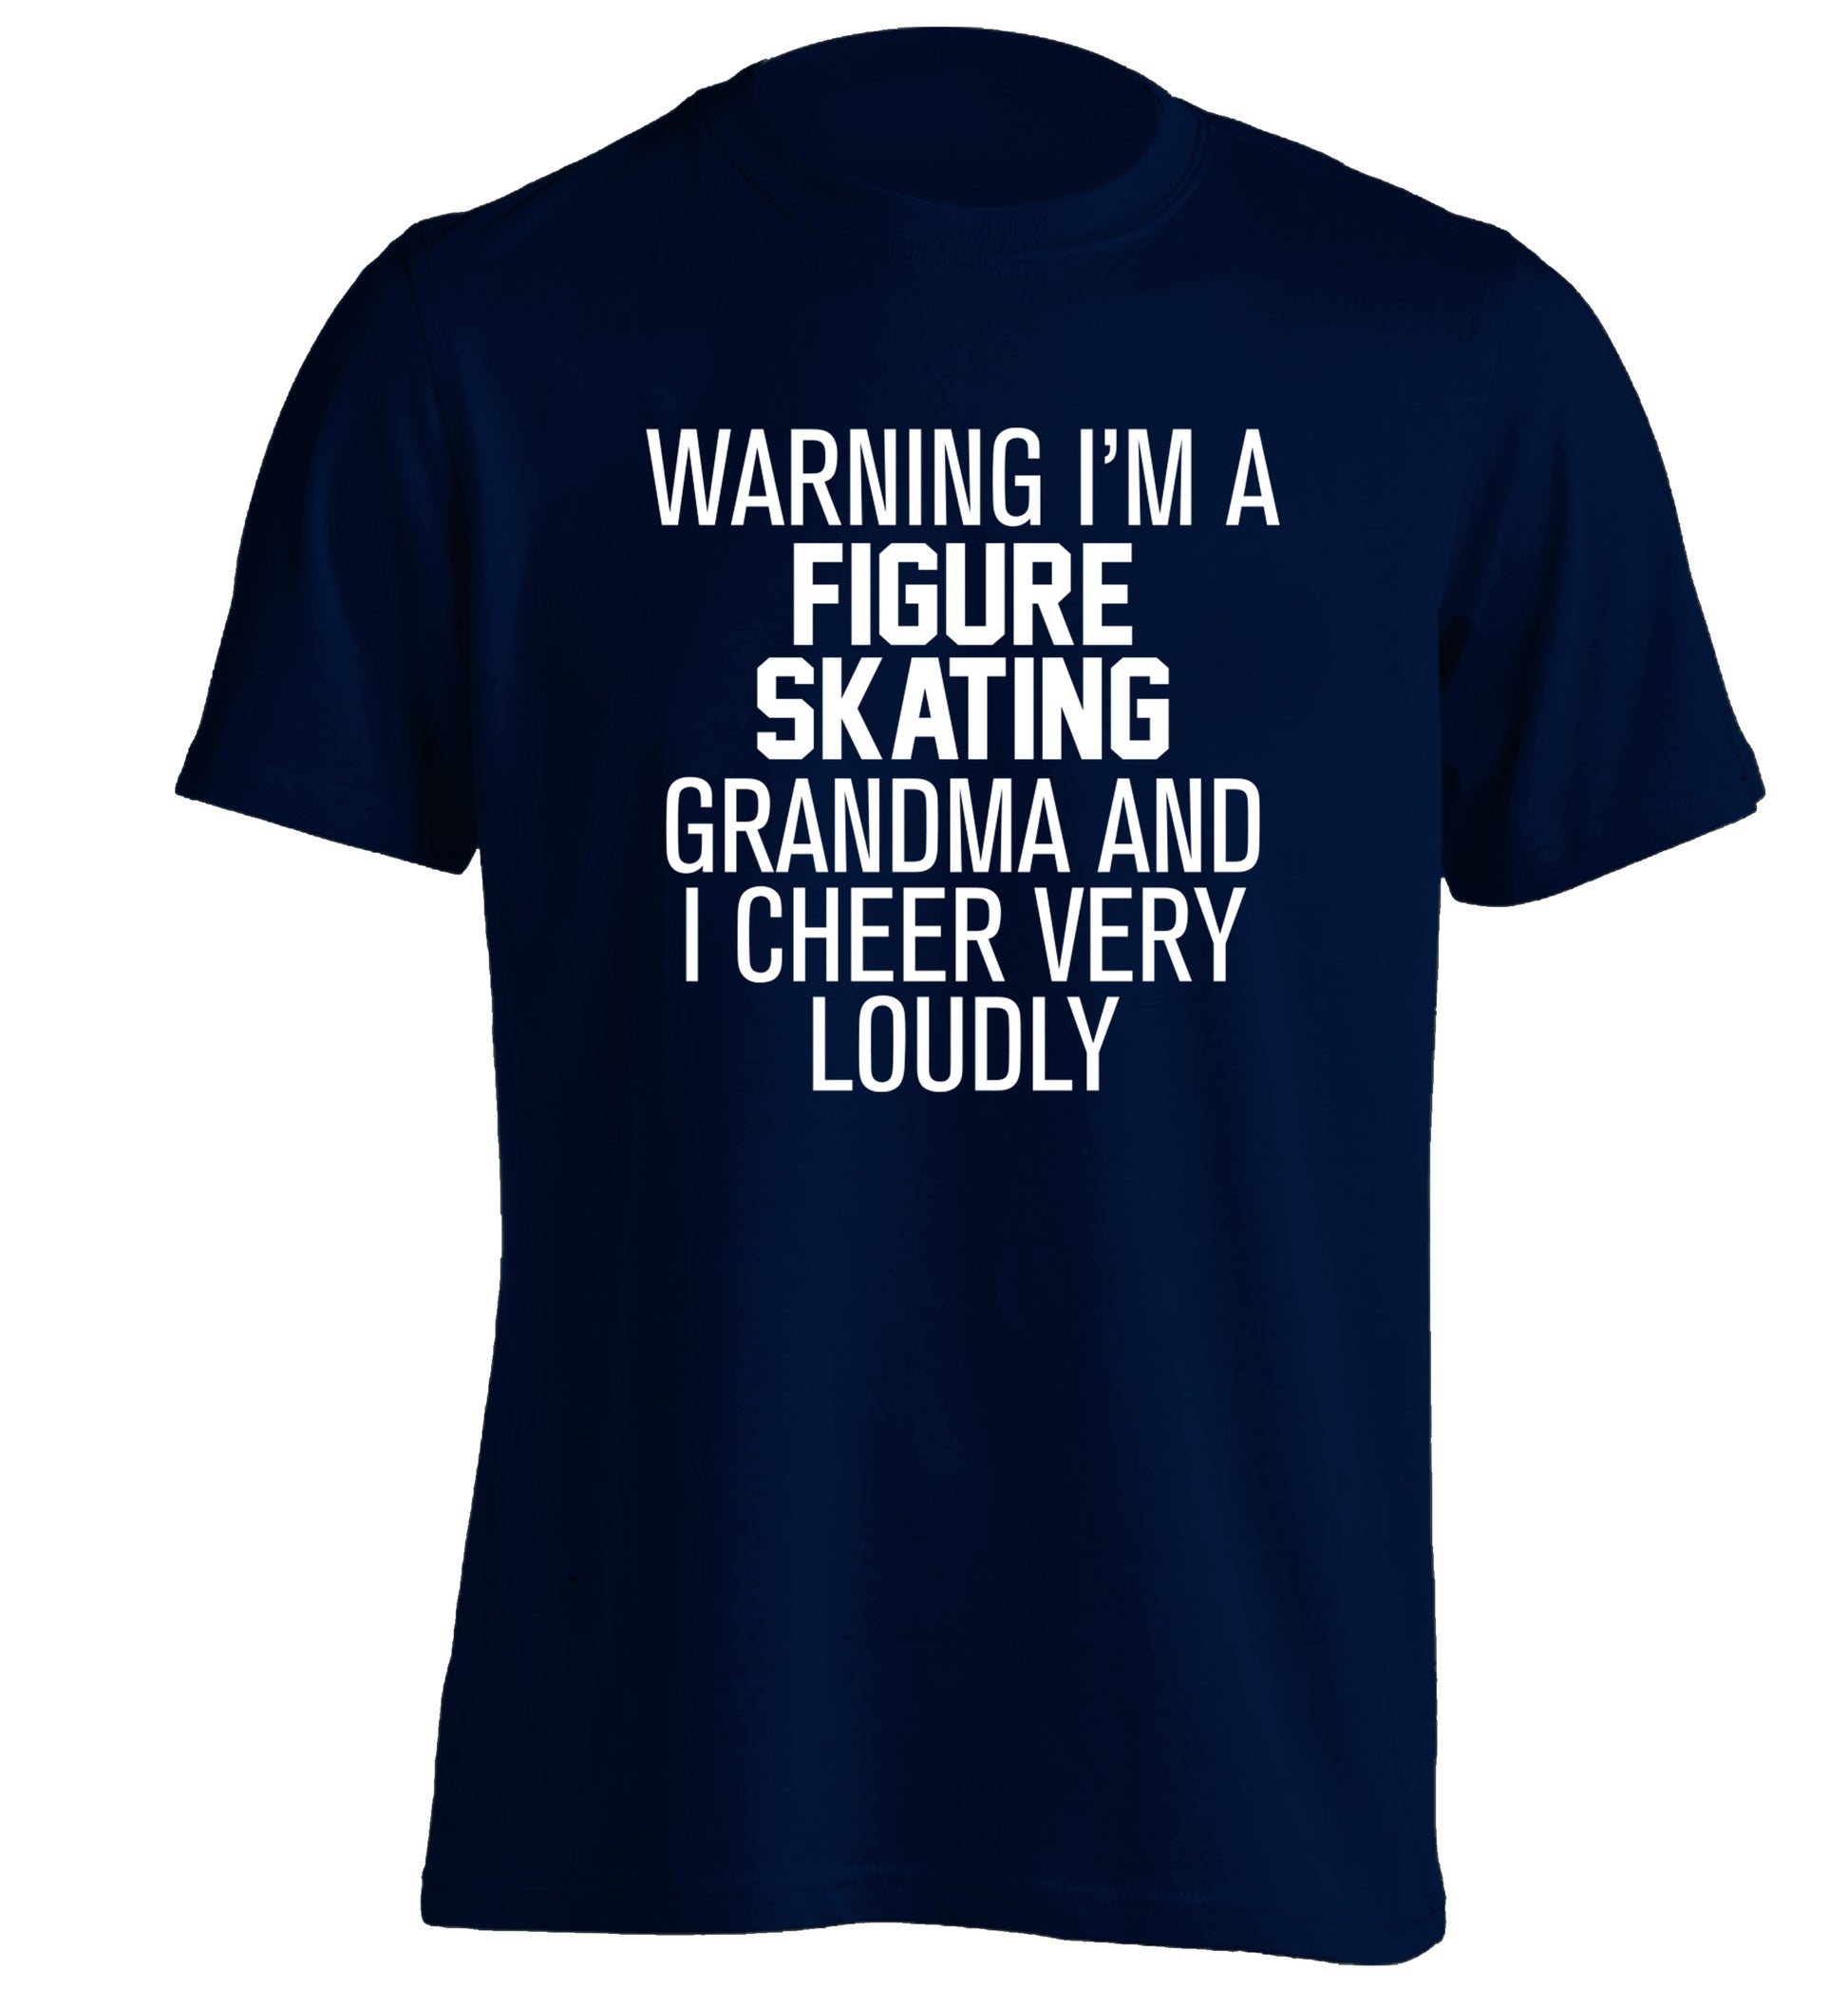 Warning I'm a figure skating grandma and I cheer very loudly adults unisexnavy Tshirt 2XL